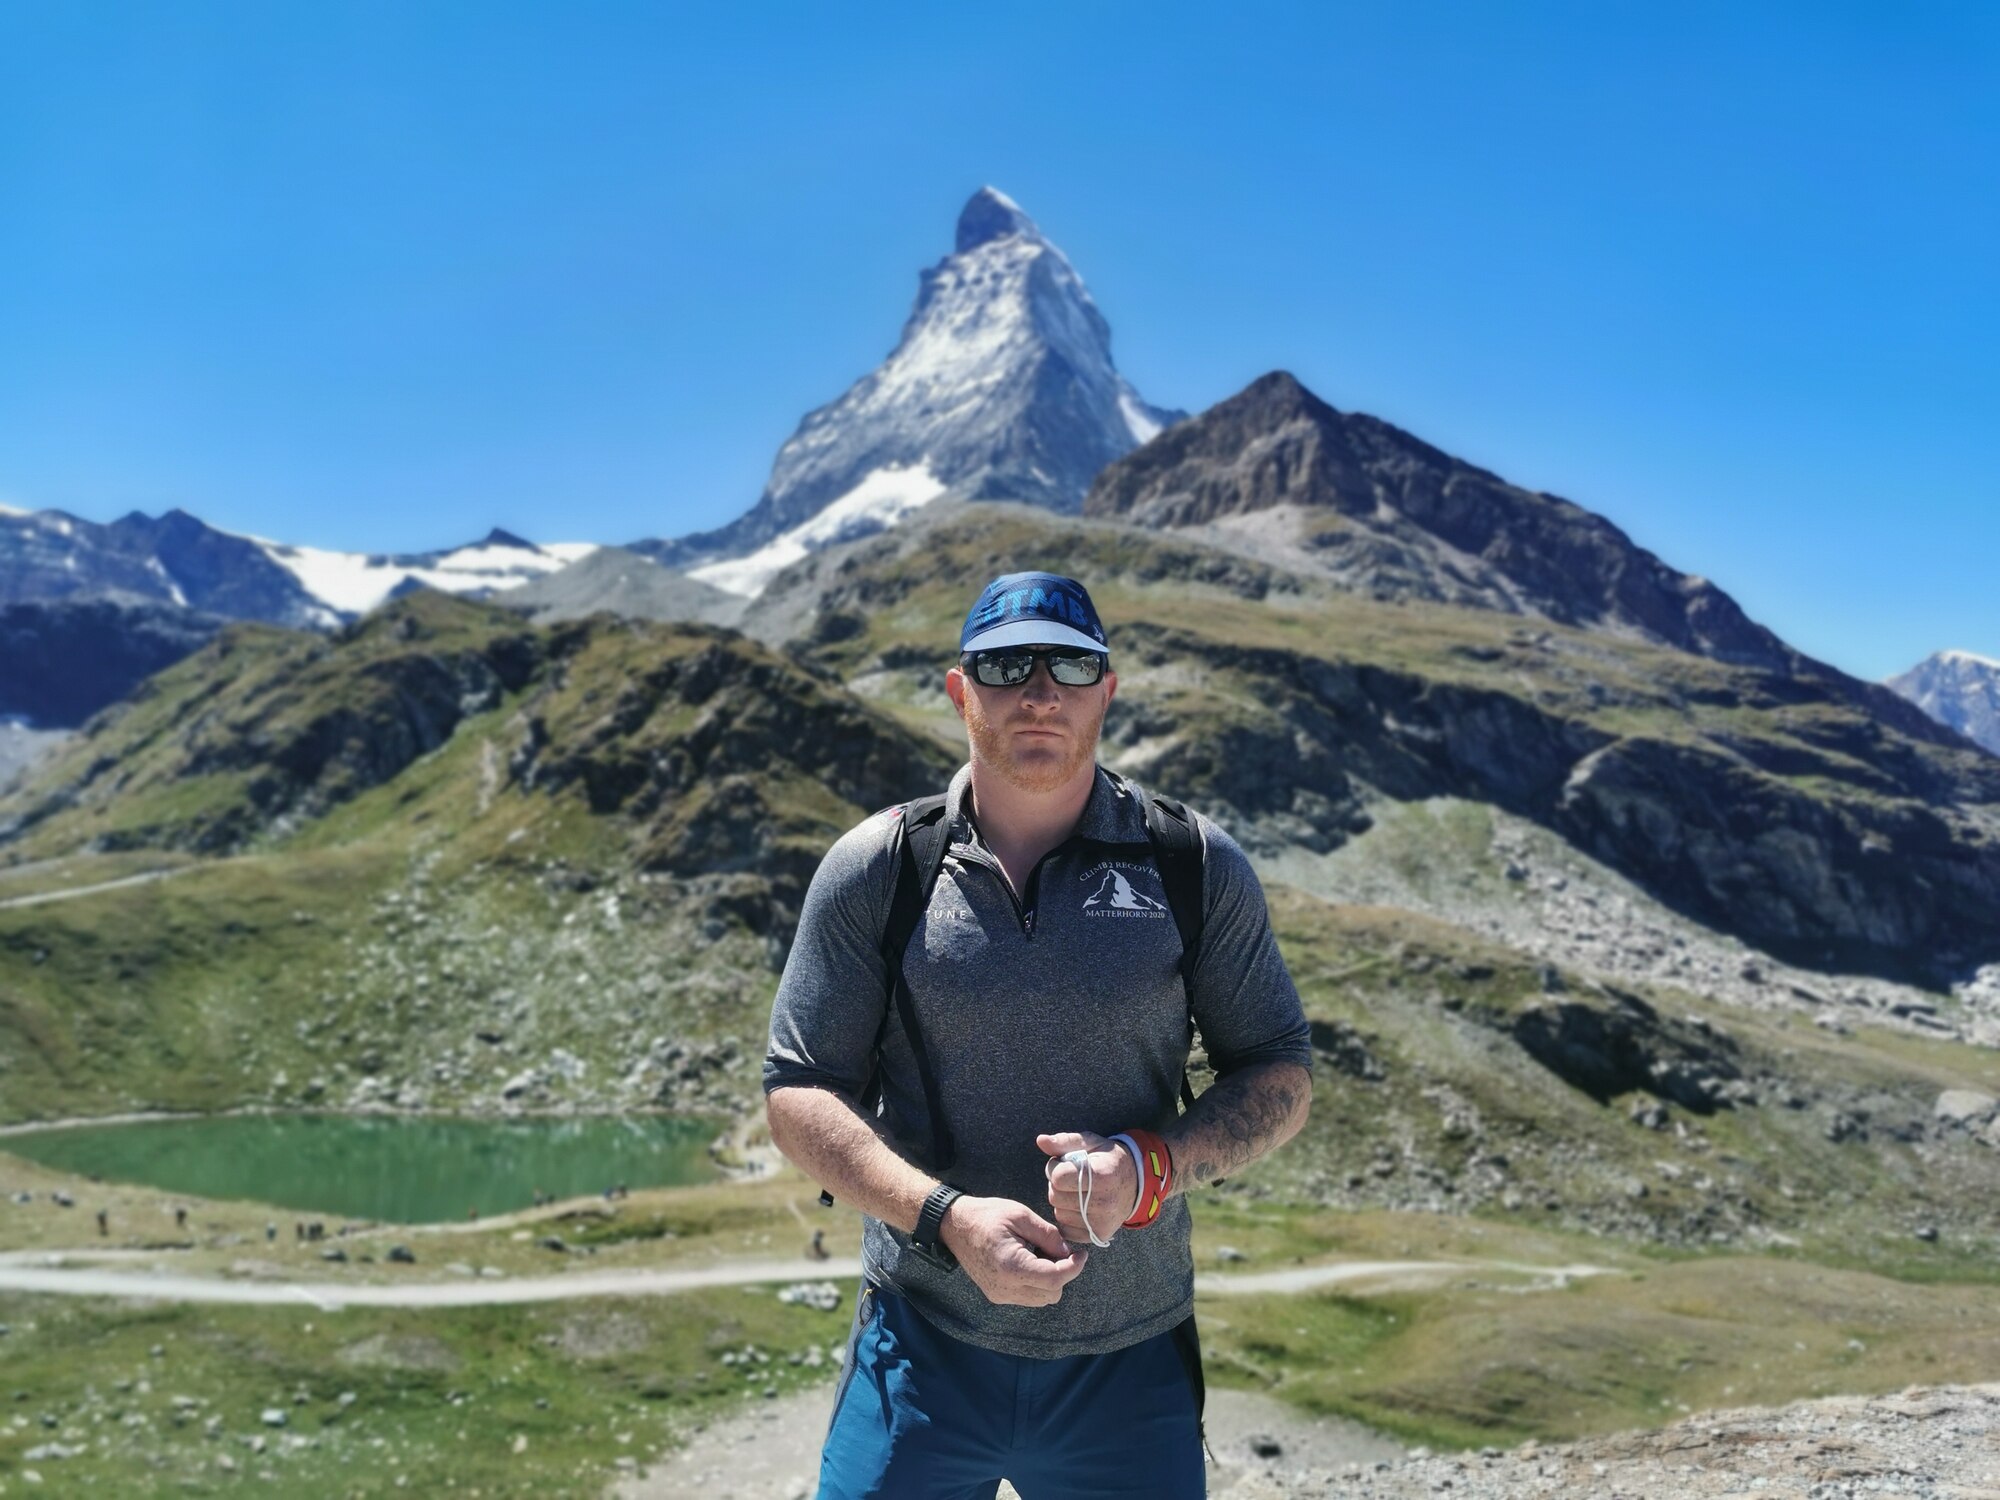 Ray Hoogendijk, 423rd Force Support Squadron Outdoor Recreation (ODR) director at RAF Molesworth, England, joined six other wounded veterans to climb the Matterhorn mountain in the Swiss Alps, Aug. 6, 2020. The trip was organized by Climb2Recovery, a U.K. charity focused on supporting the physical and mental recovery of wounded veterans through rock climbing. The purpose of the climb was to support Army veteran Neil Heritage, who made history as the first double amputee to climb the Matterhorn summit, and to raise awareness about the Climb2Recovery’s mission. (Courtesy Photo)